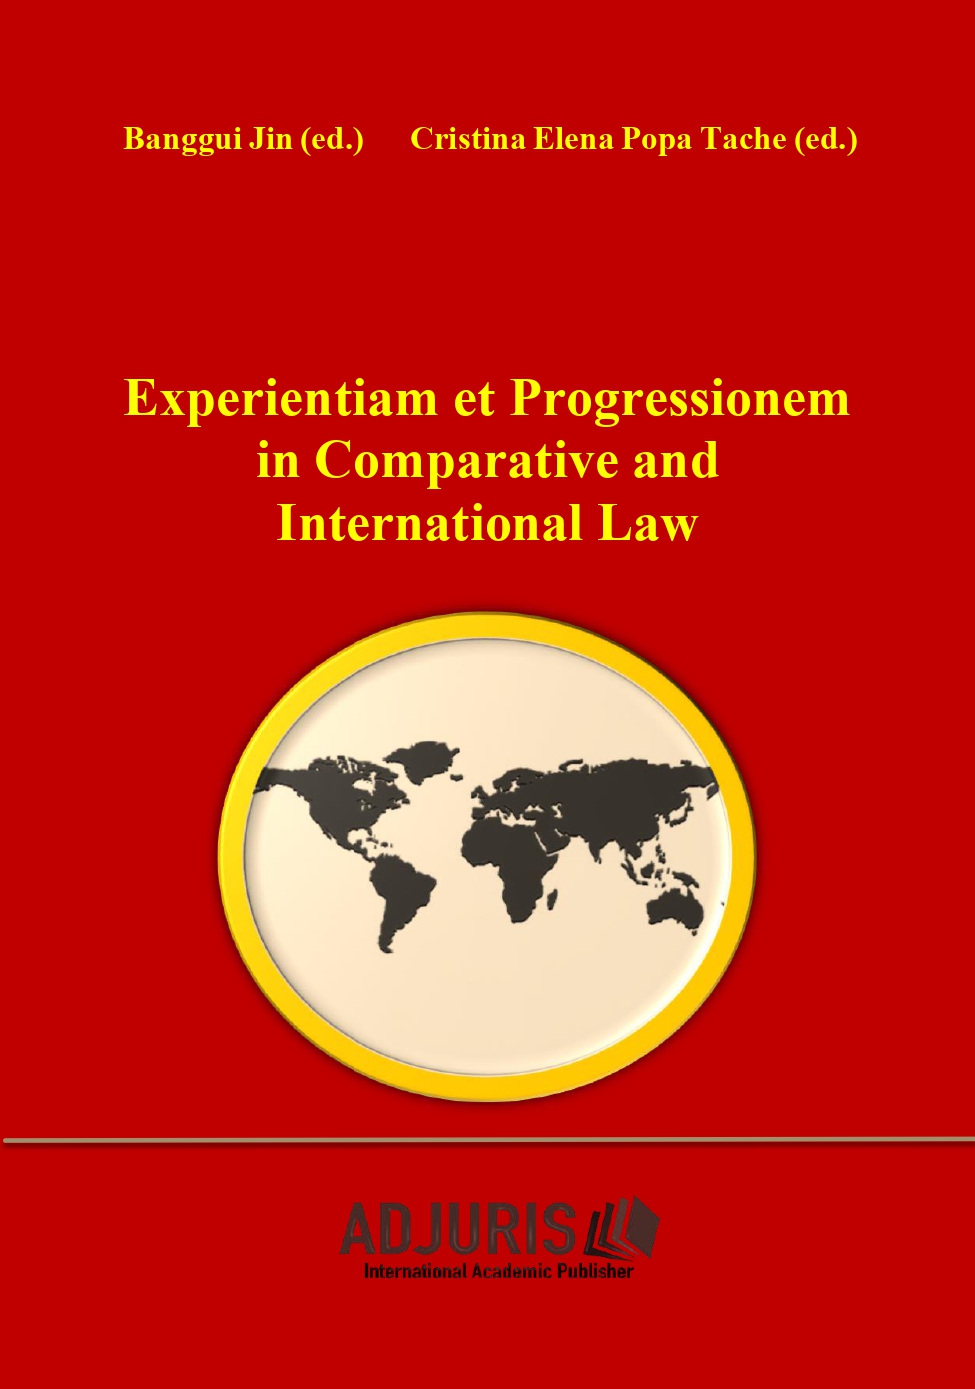 Experientiam et Progressionem in Comparative and International Law. Contributions to the 2nd Conference on Comparative and International Law - June 24, 2022, Bucharest - International Conference